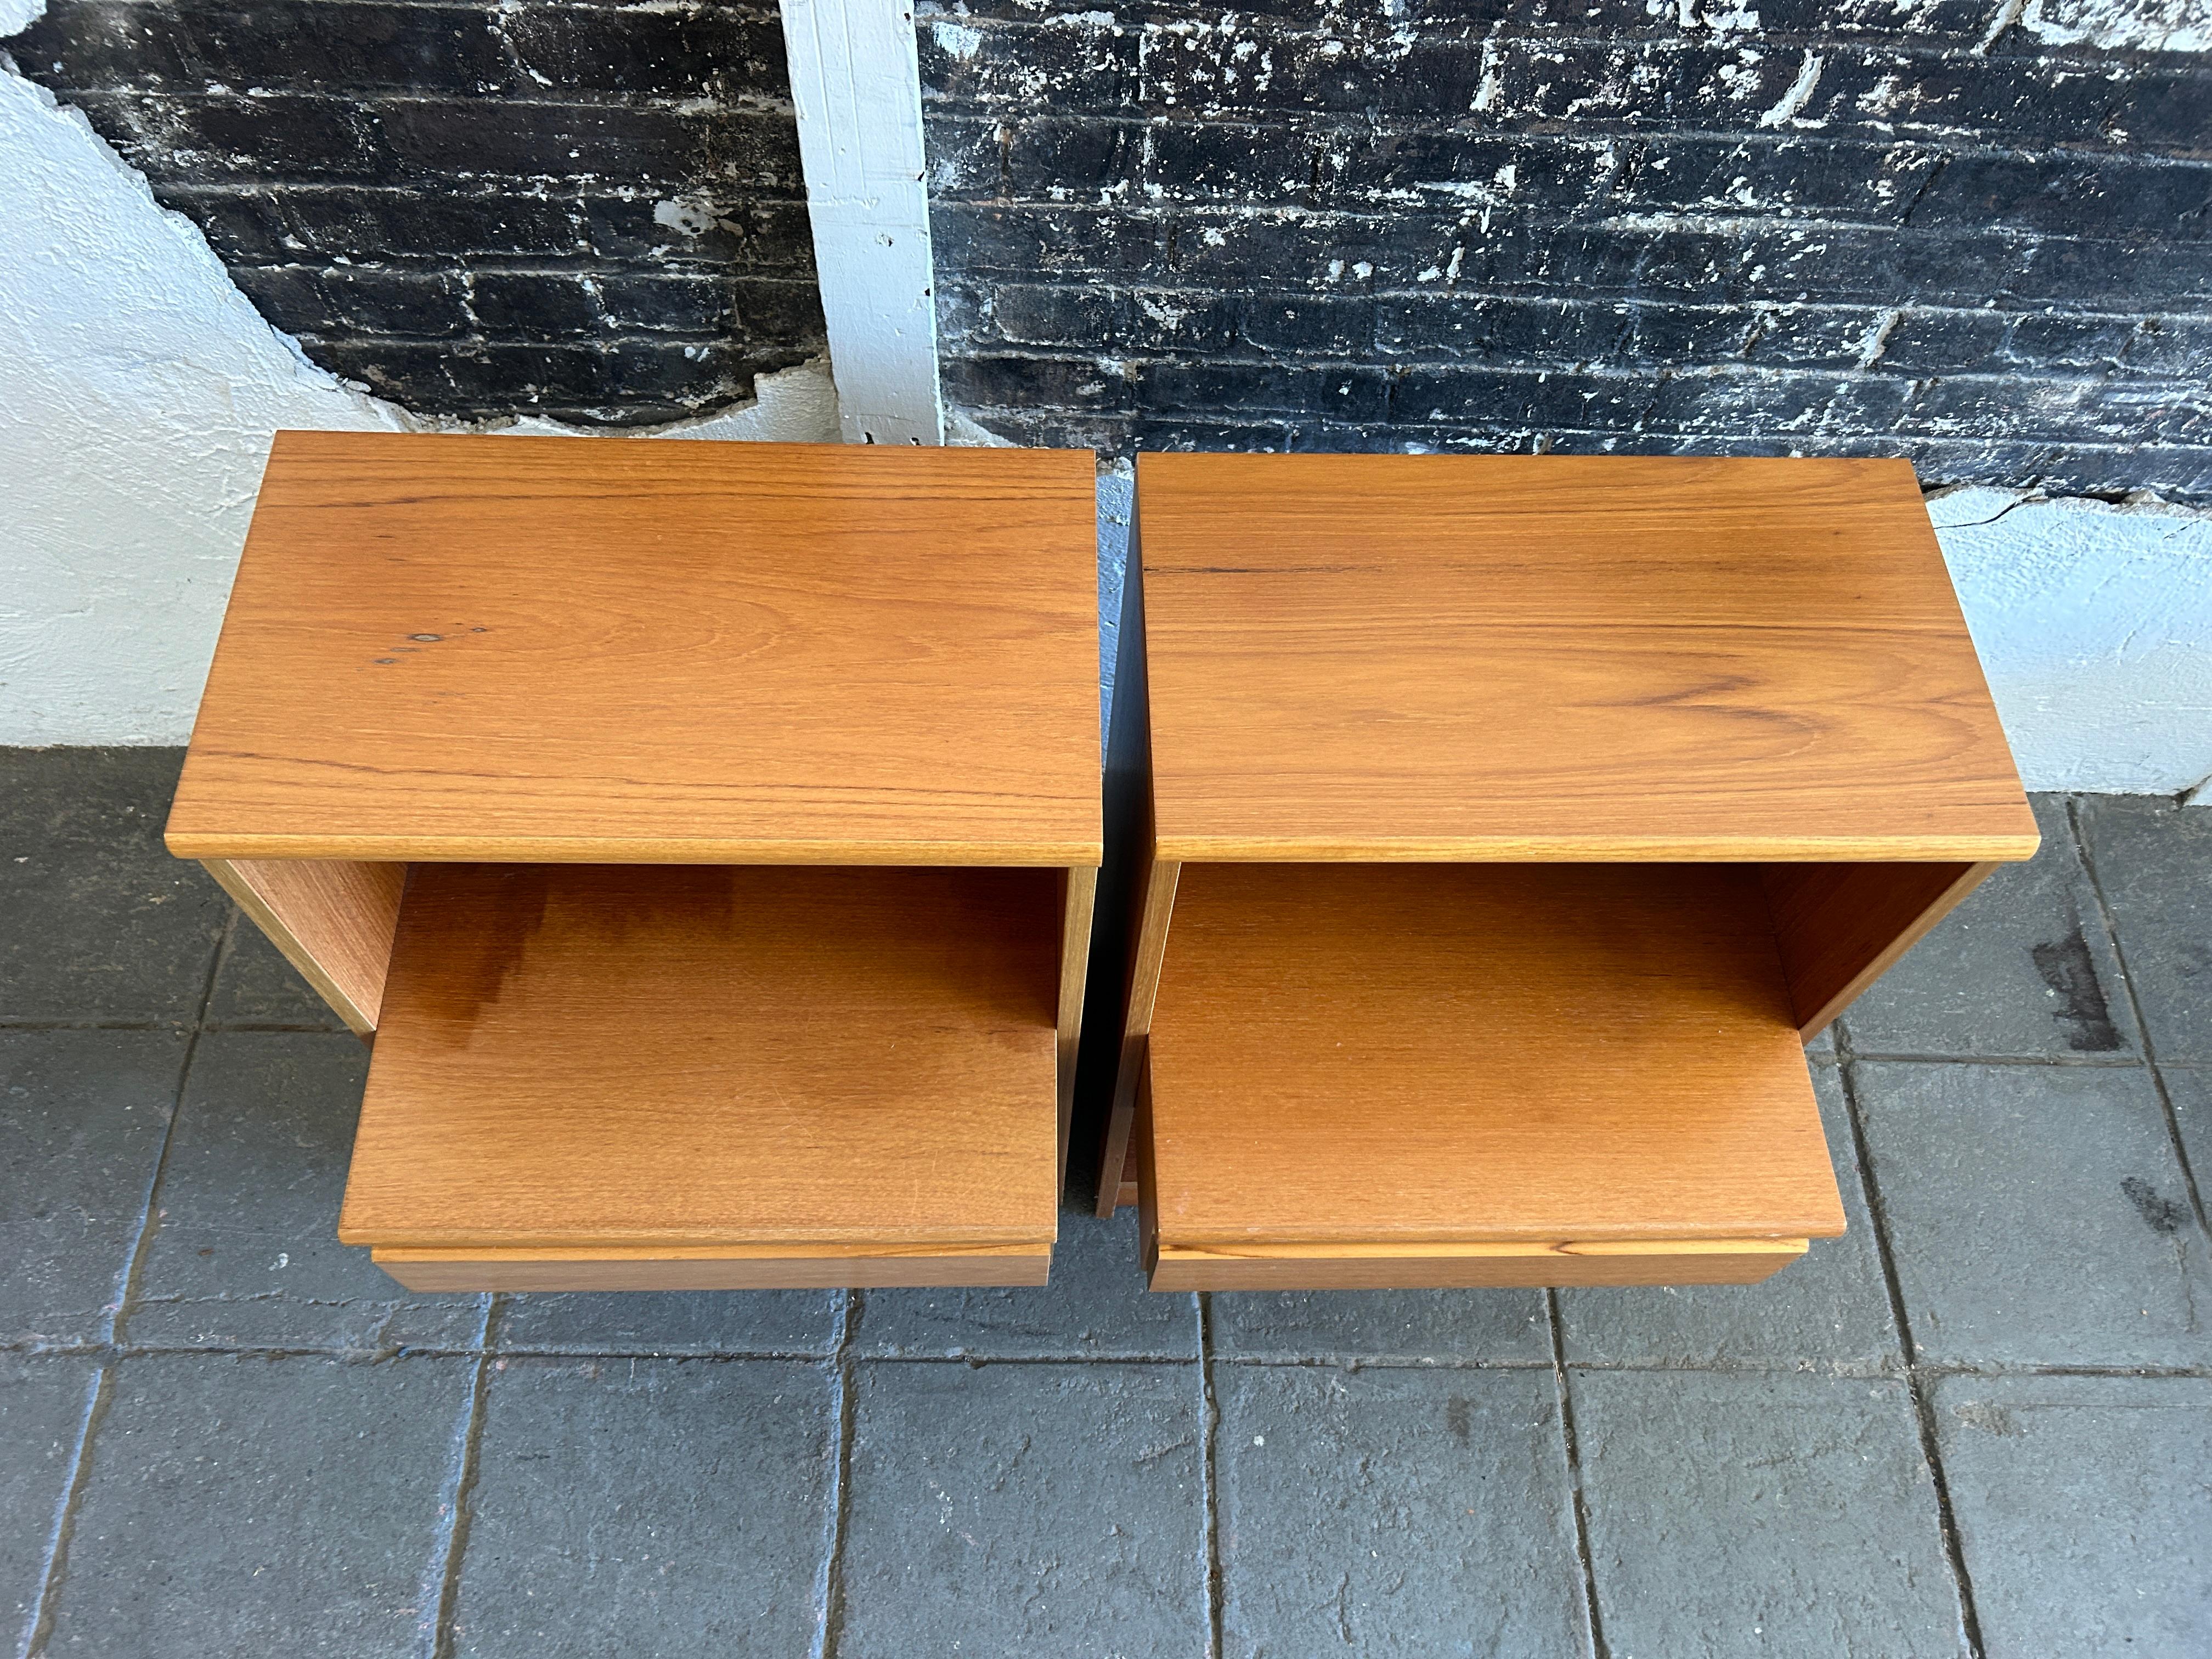 Pair of danish modern single drawer teak nightstands. Light teak wood with upper and lower cubby and (1) center drawer on each nightstand. Simple Danish design circa 1970 made in Denmark. Located in Brooklyn NYC.

Sold as a set of (2) a pair of